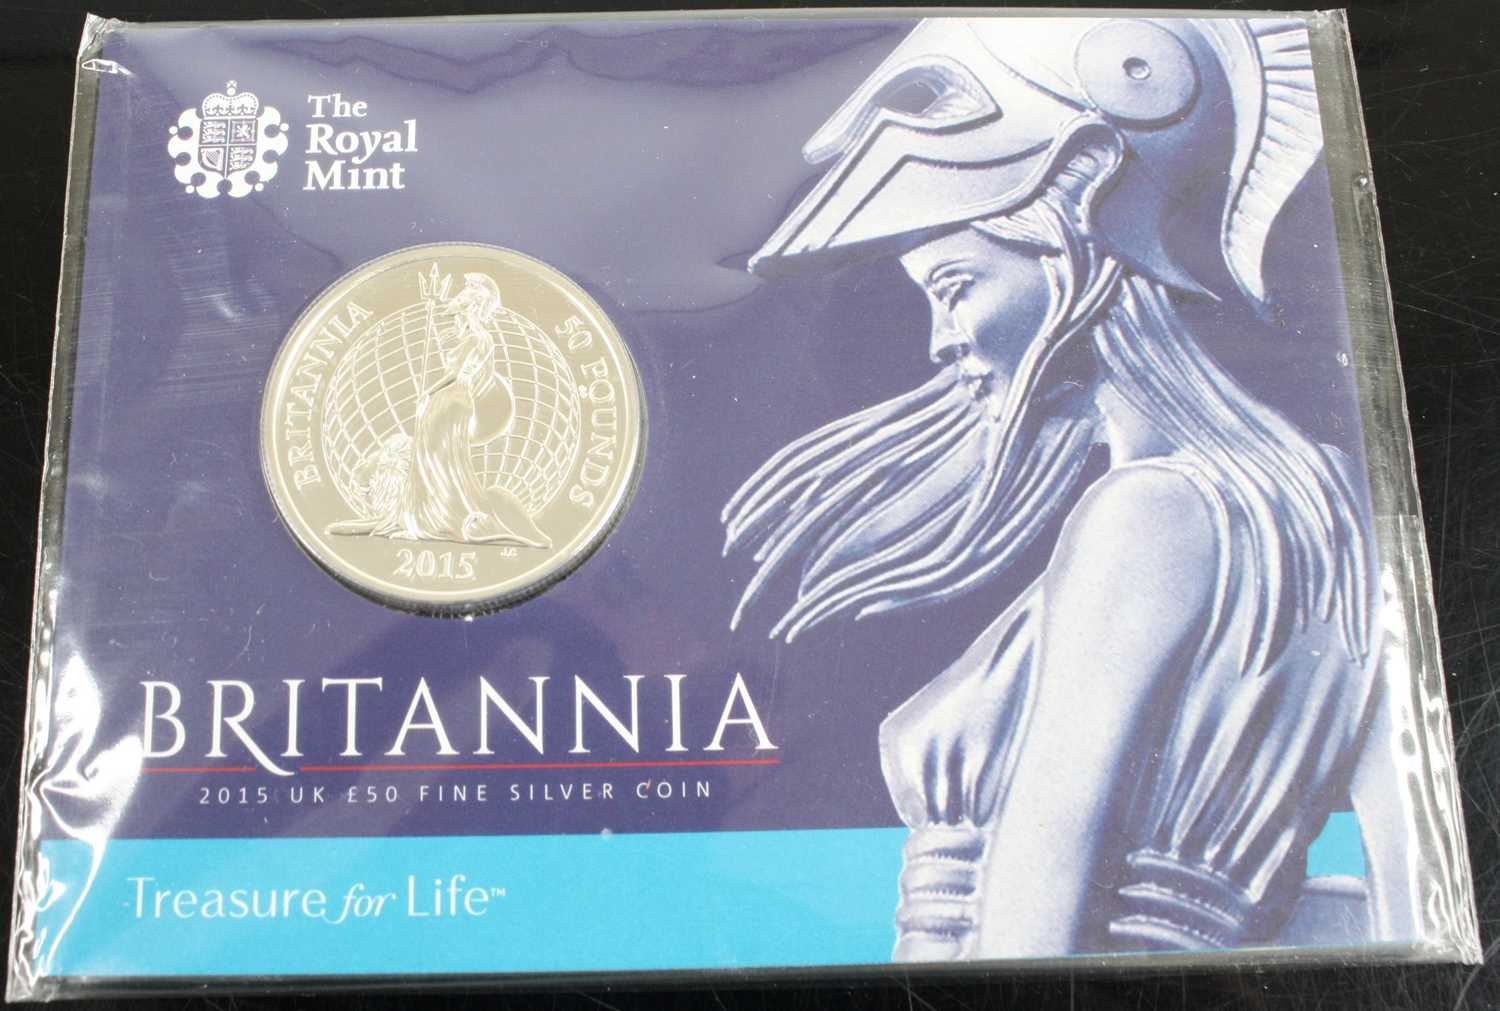 United Kingdom, The Royal Mint, 2007 Silver Bullion Britannia £2 Coin, in card sleeve, together with - Image 2 of 2